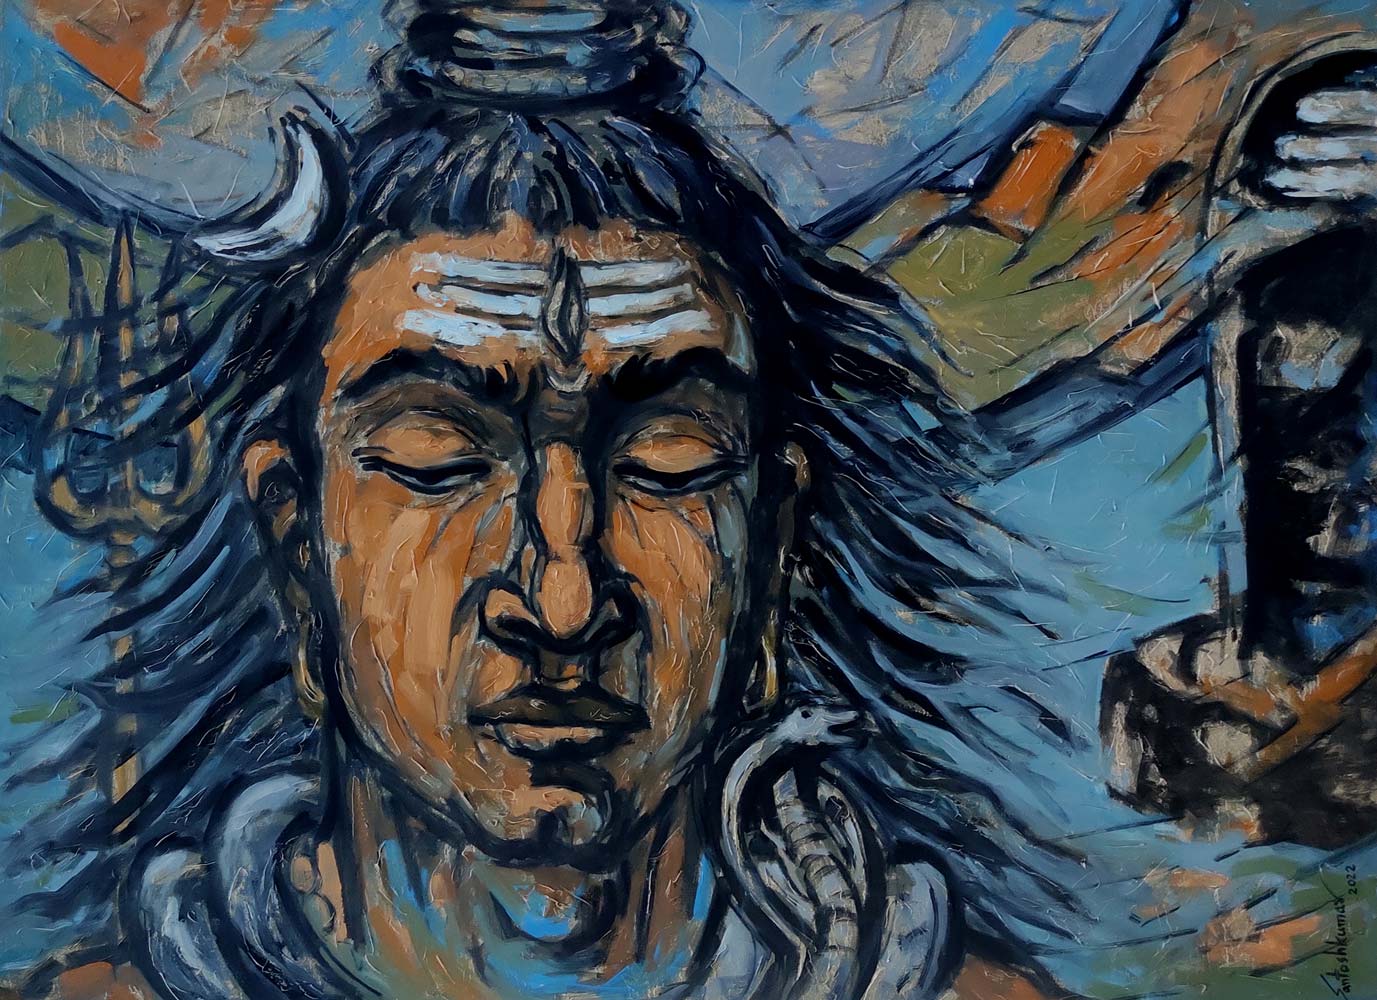 Figurative Painting with Oil on Canvas "Shiva-204" art by Santoshkumar Patil